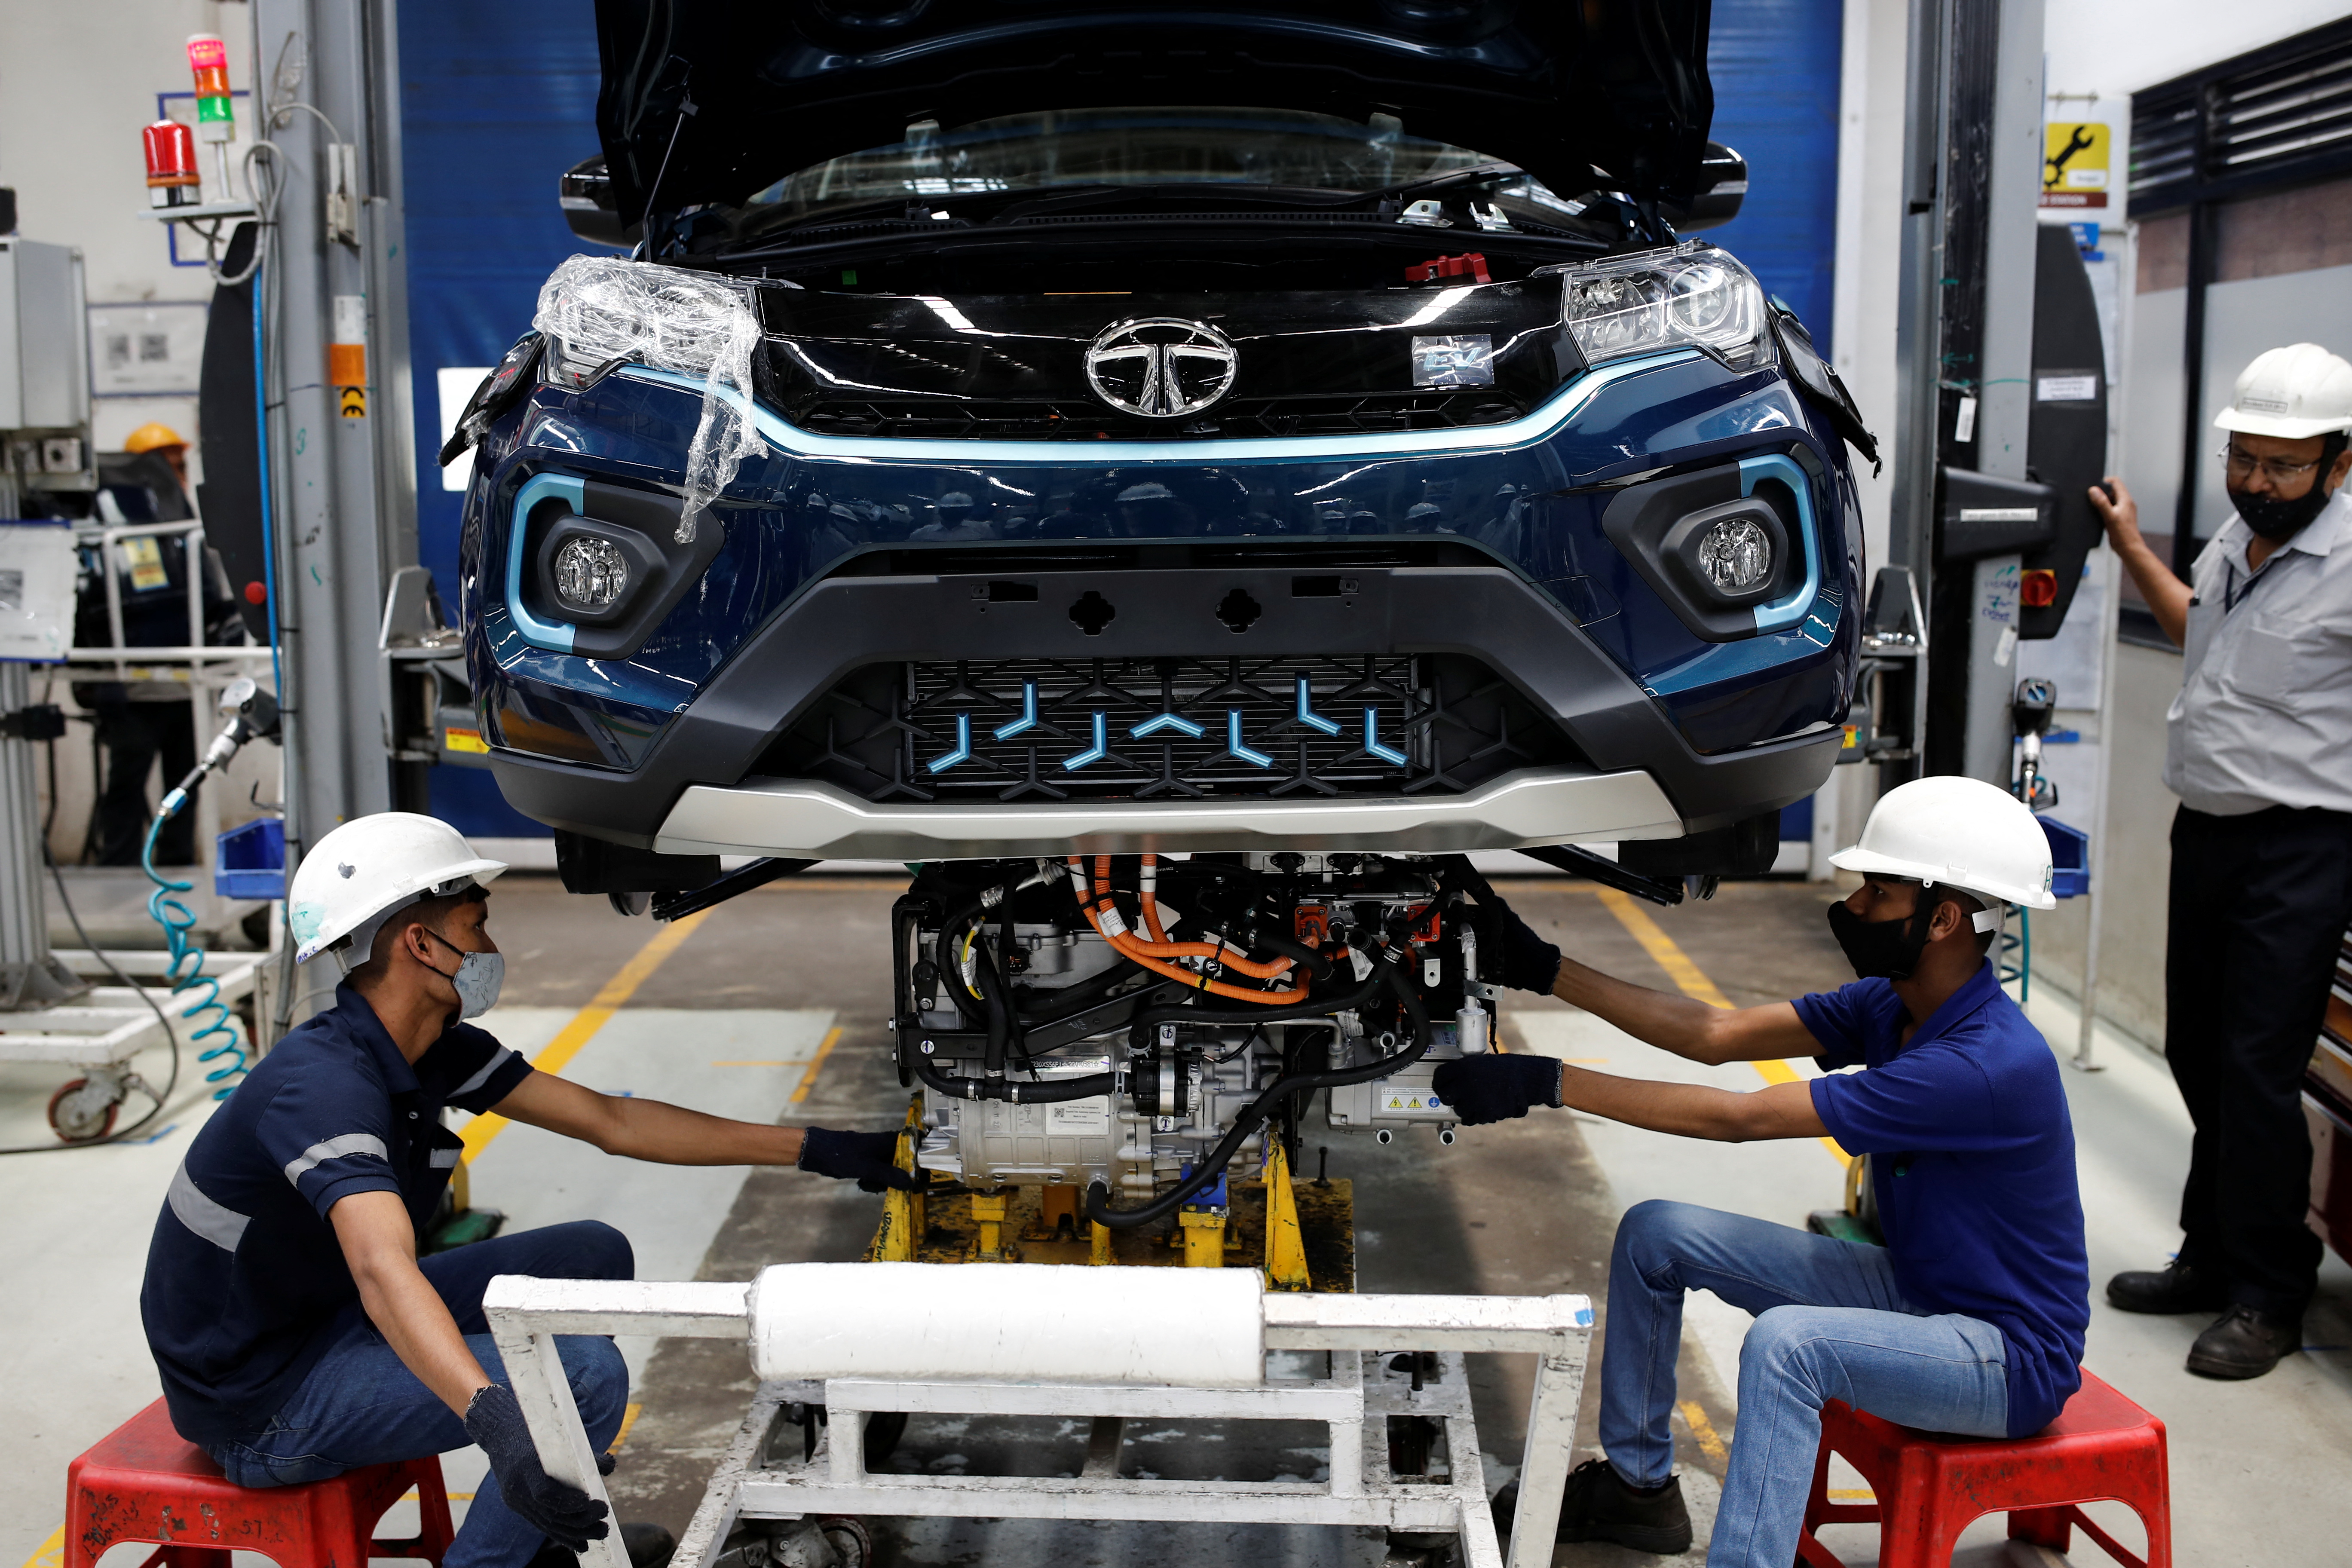 Workers install the electric motor inside a Tata Nexon electric sport utility vehicle (SUV) at the Tata Motors plant in Pune